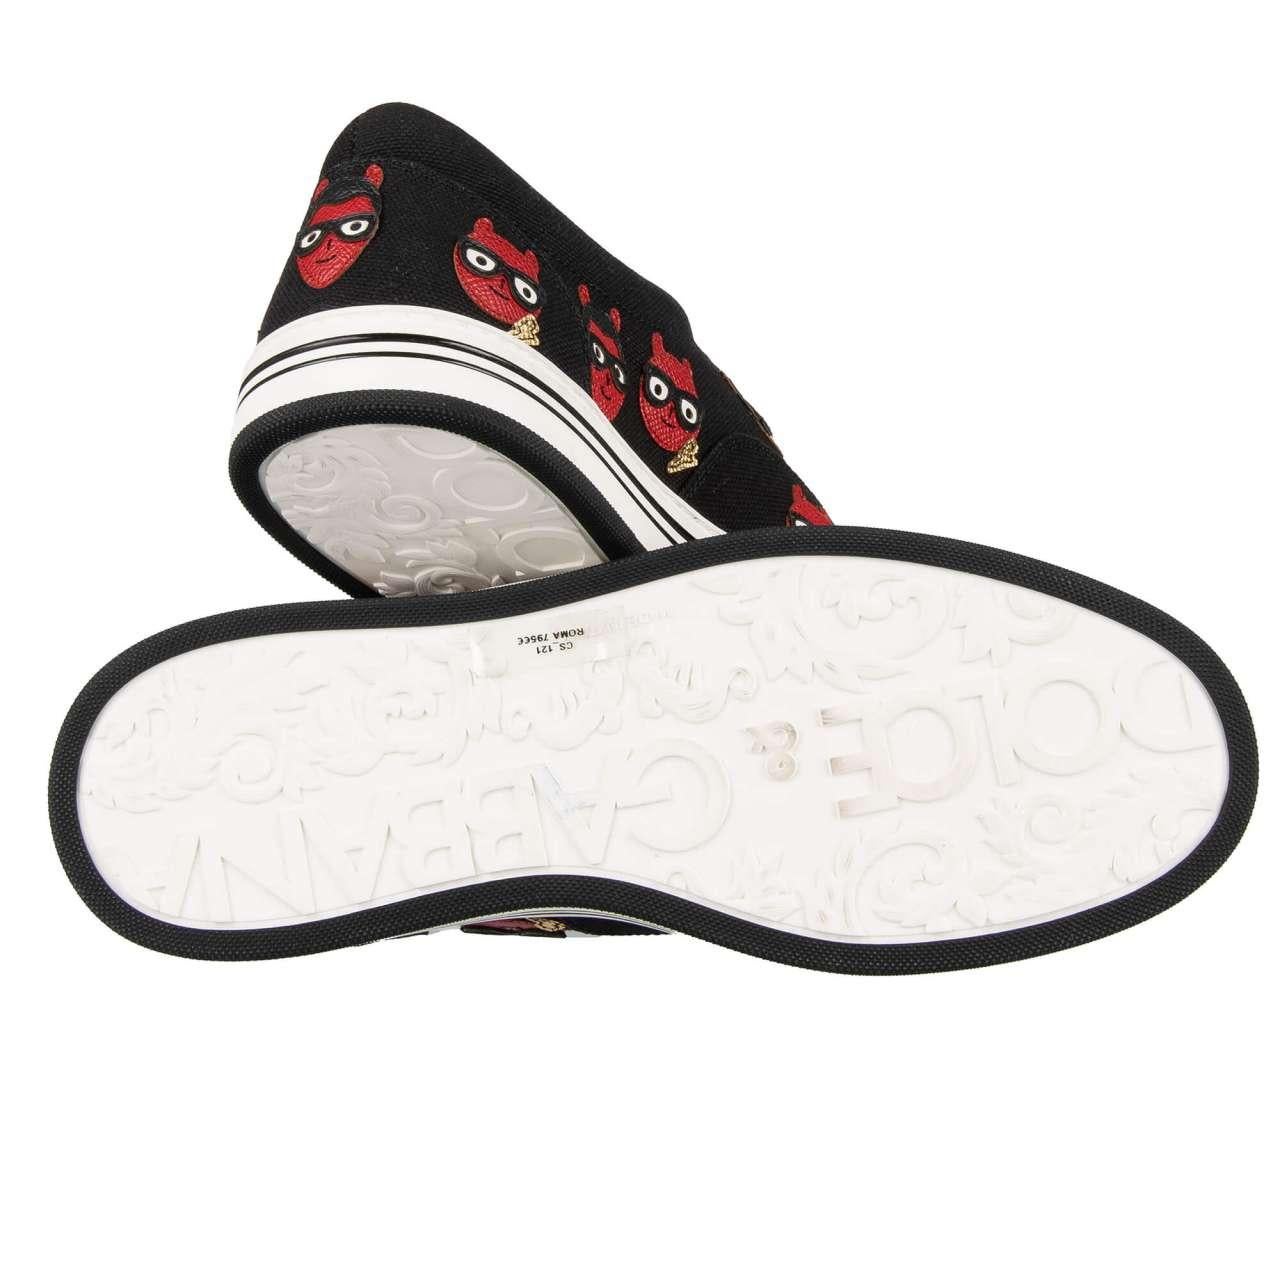 Men's Dolce & Gabbana Low-Top Canvas Sneaker ROMA with Leather Embroidery Black EUR 41 For Sale